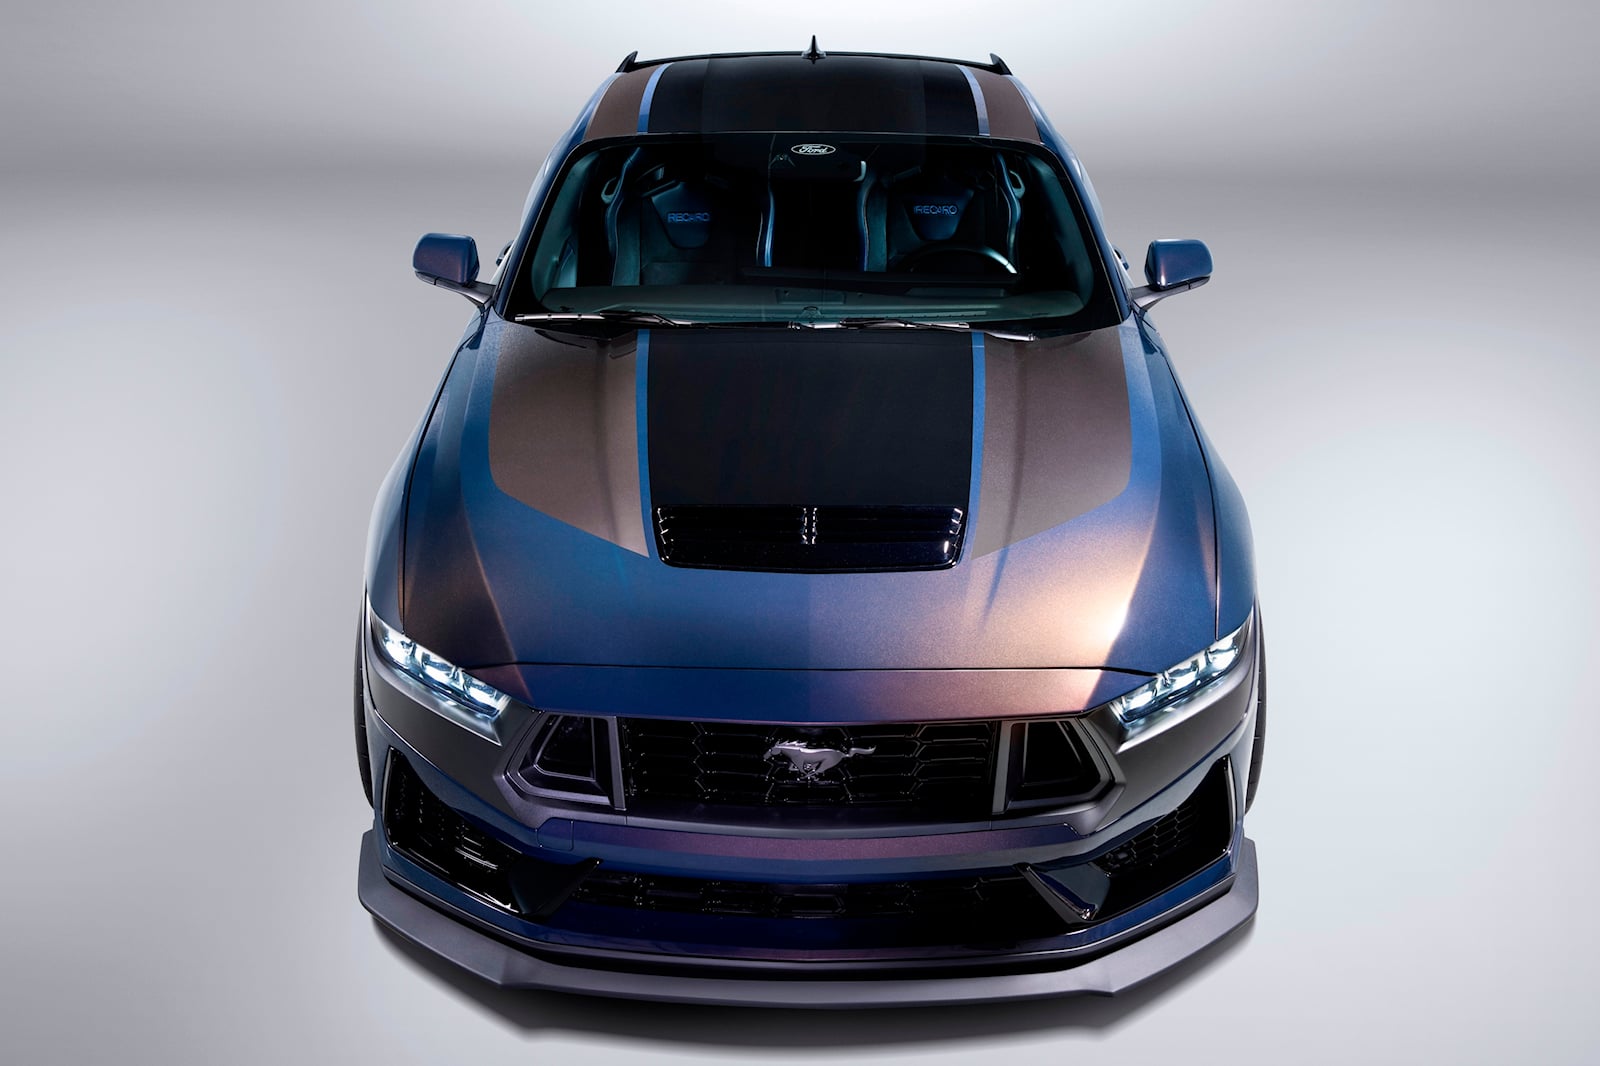 What Makes The All New Ford Mustang Dark Horse So Special?